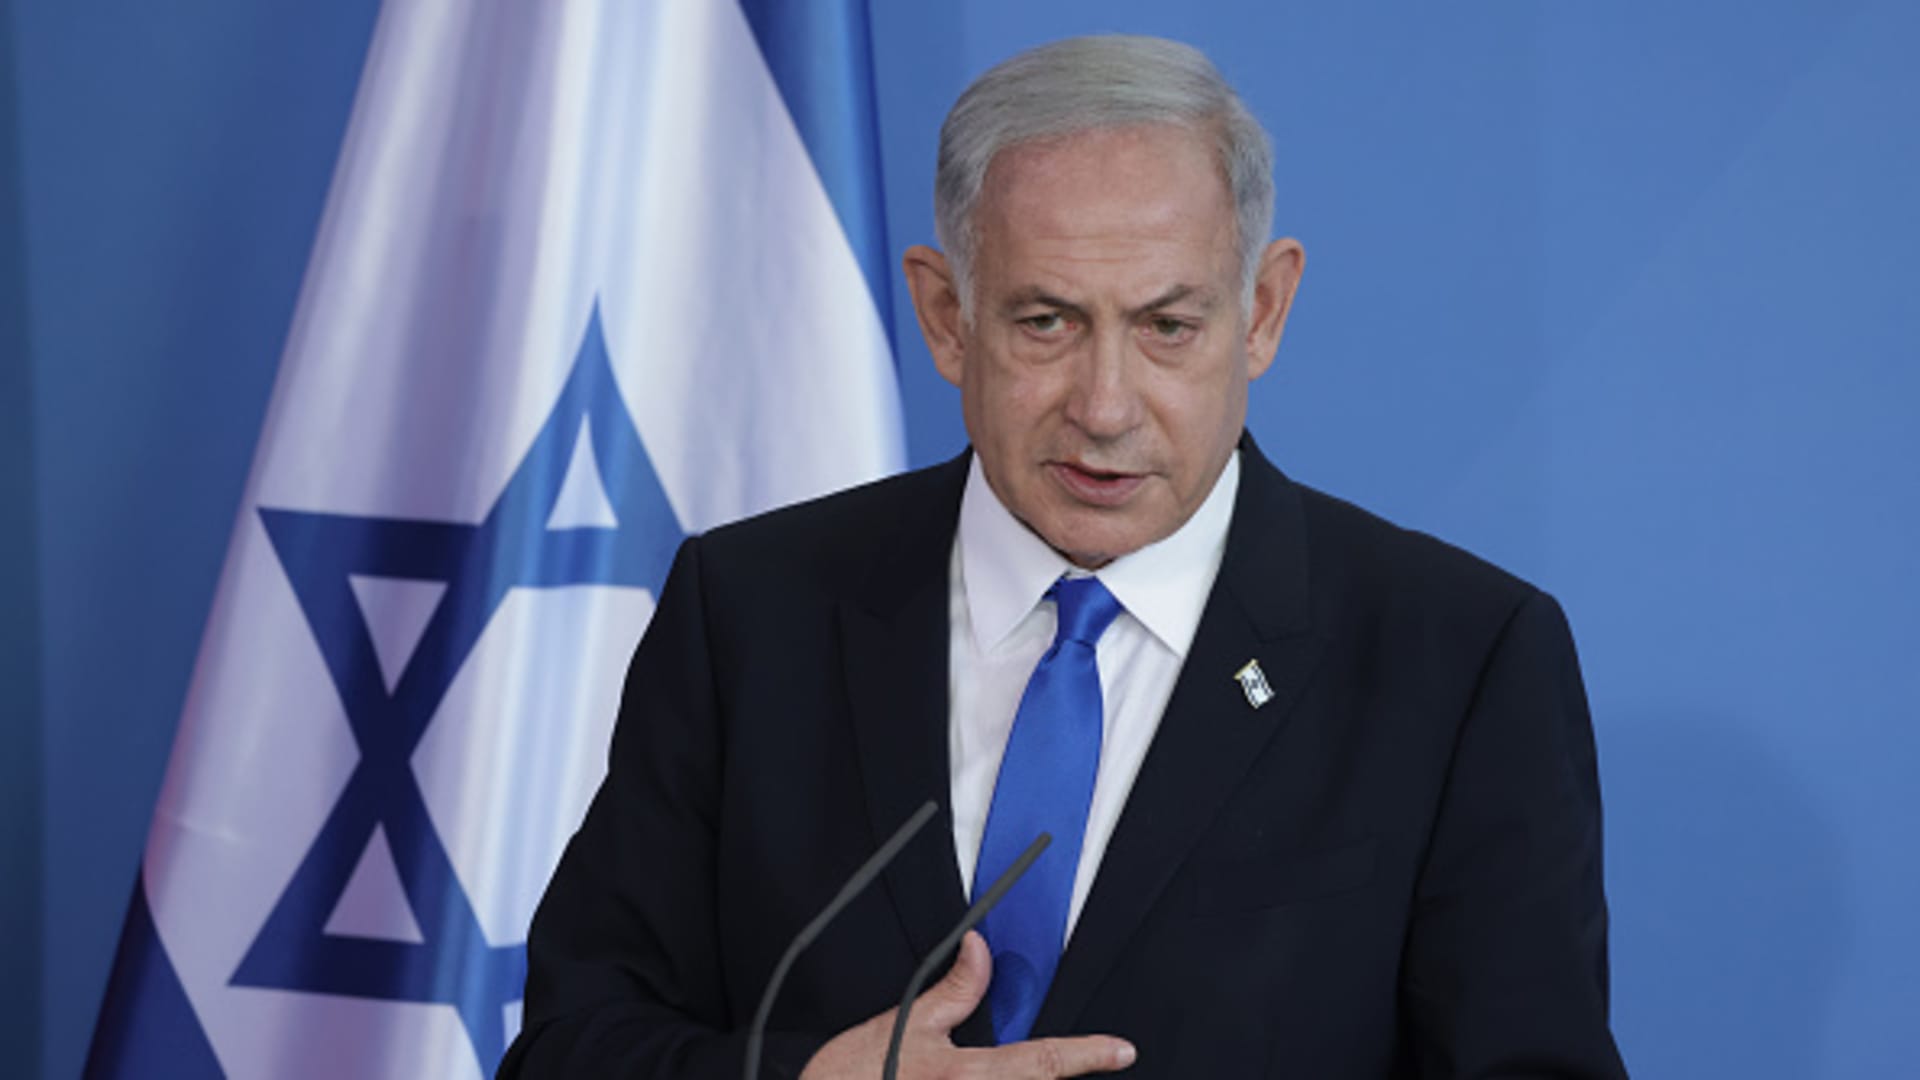 Israel's Netanyahu concerned its defense systems may reach Iran if sent to Ukraine